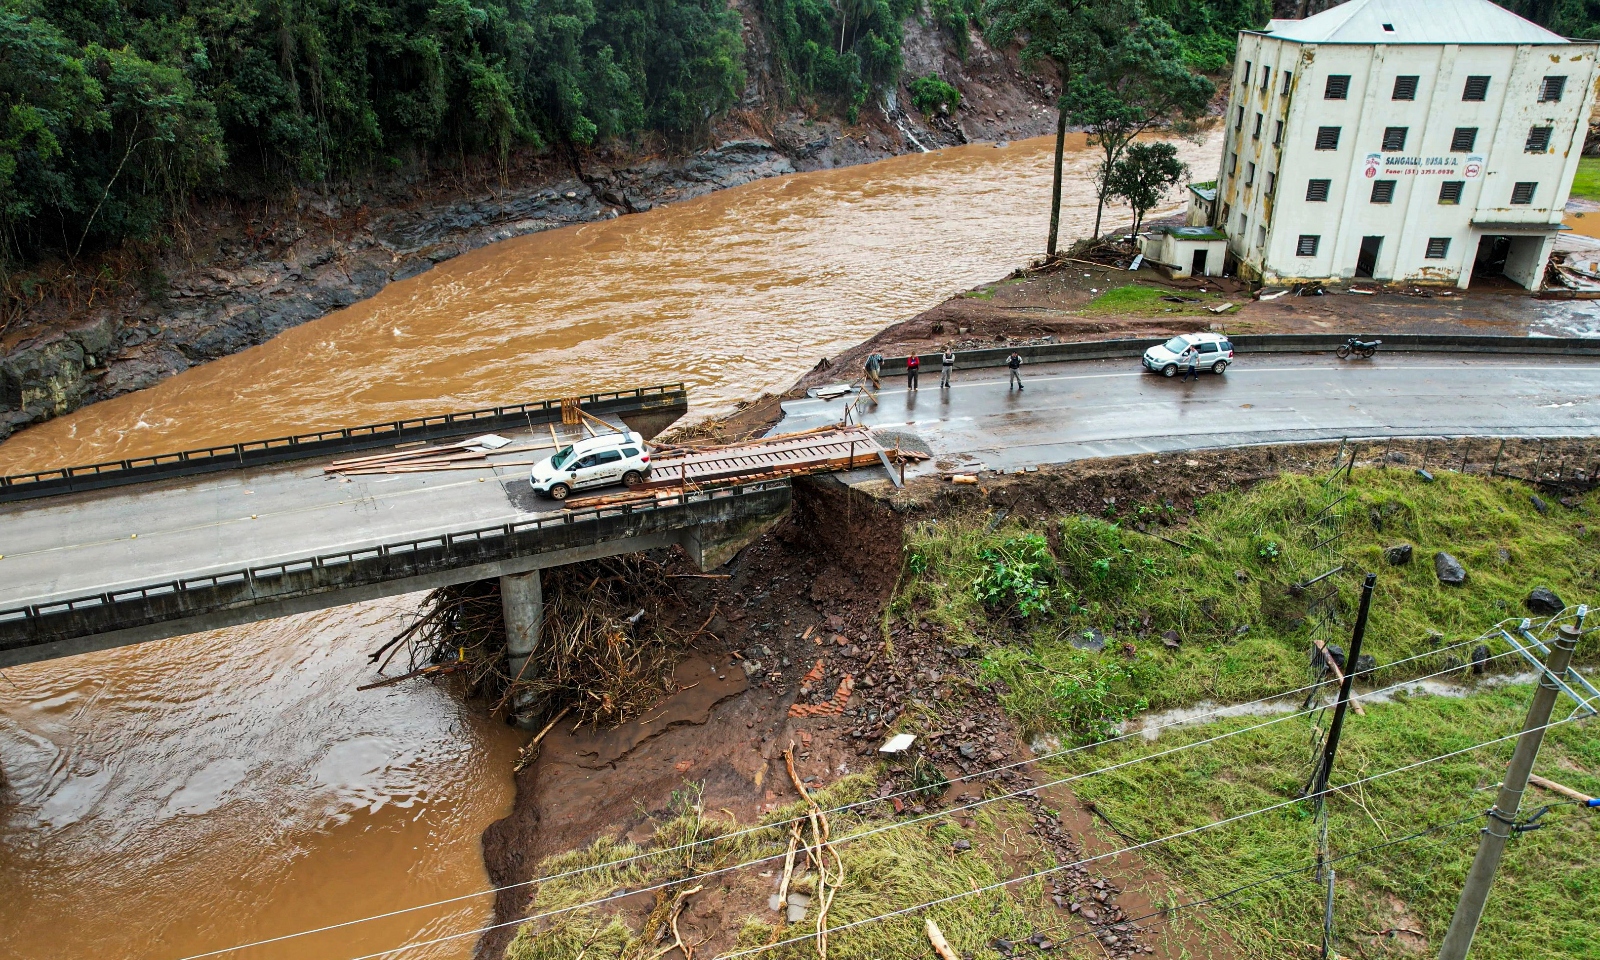 An aerial view of a bridge that crosses over a large brown river. The bridge has been partially destroyed by flooding.